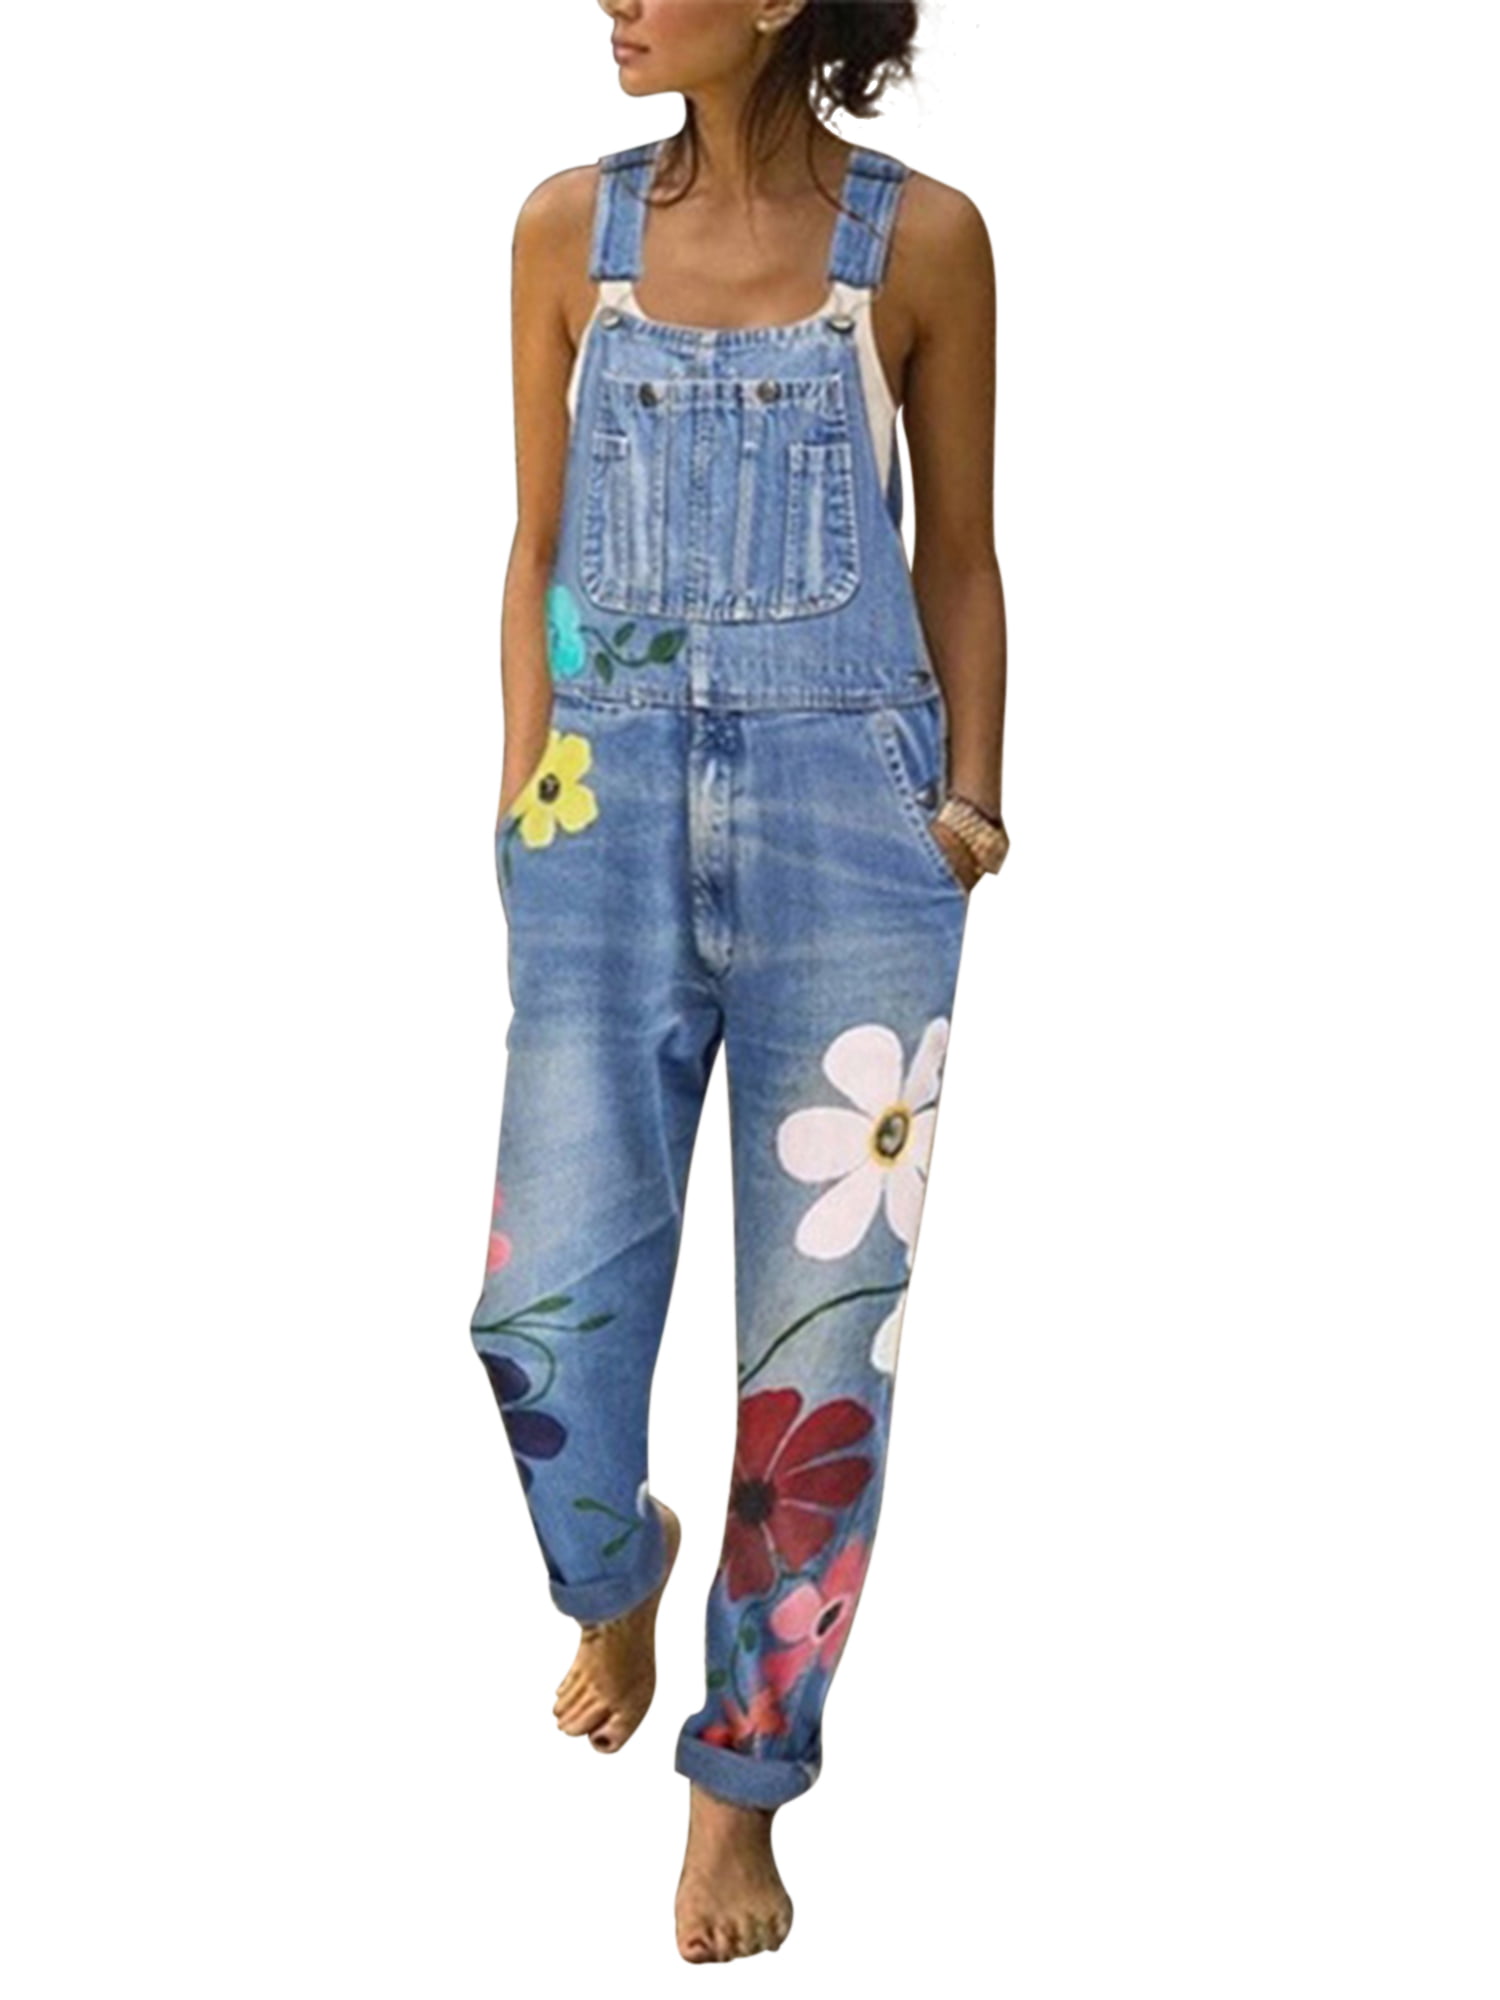 each women Men's Denim Jeans Dungarees Mens Baggy Adjustable Casual Overalls Loose Fit Rompers Jumpsuits